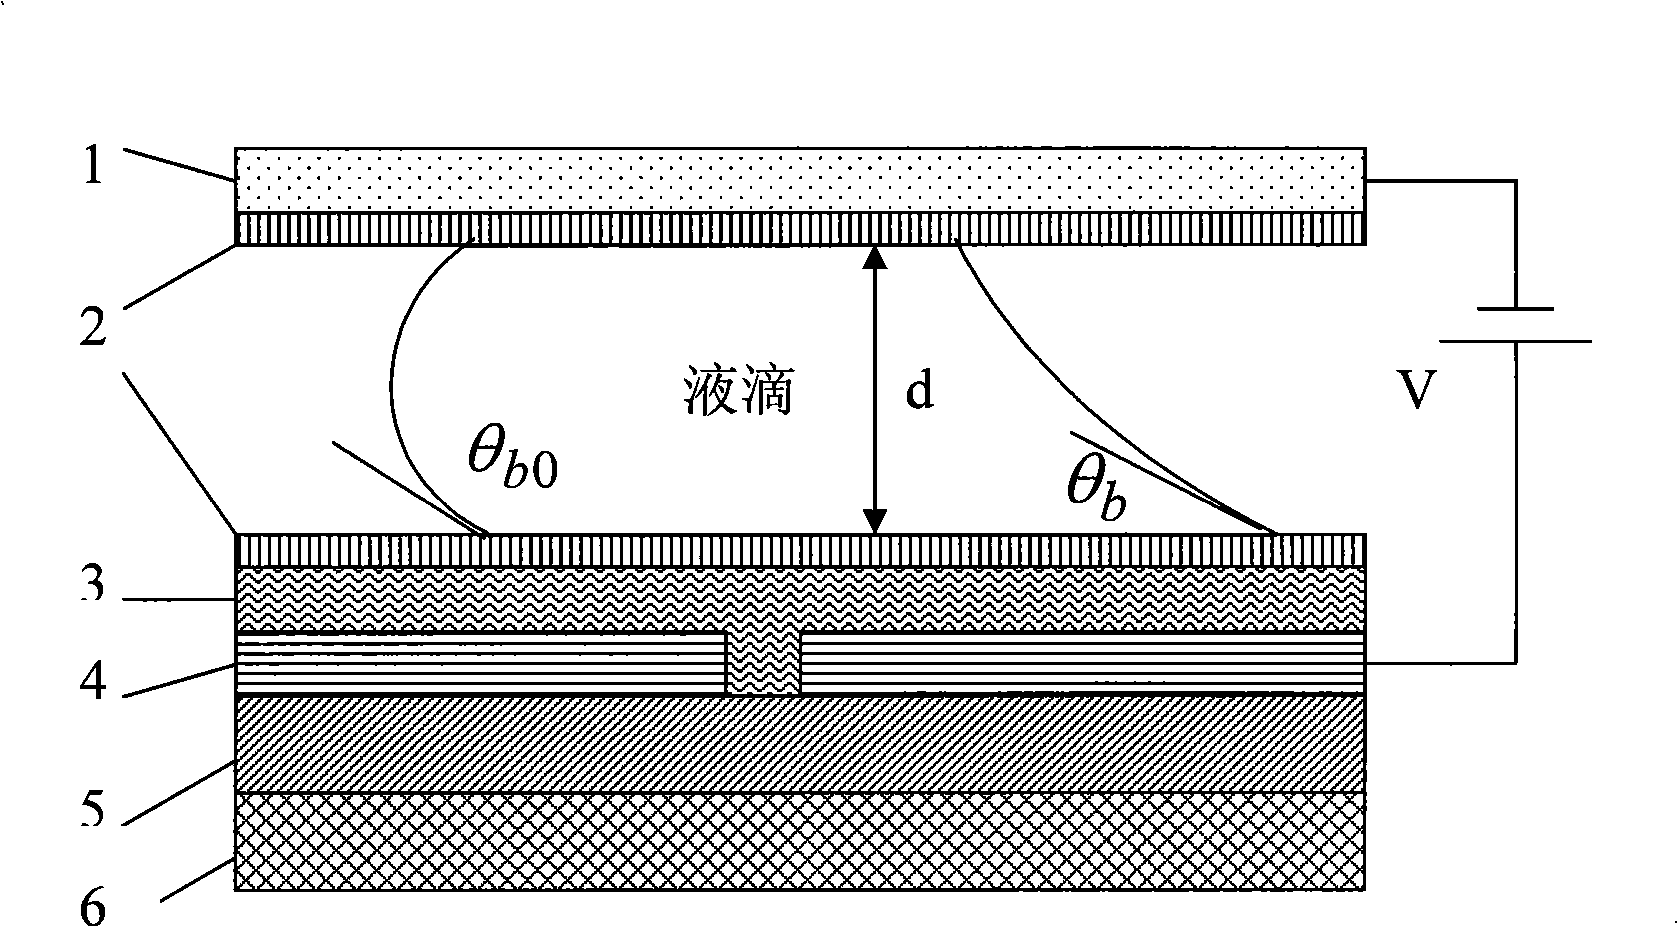 Digital microcurrent-controlled device and control method based on electrowetting effect on dielectric